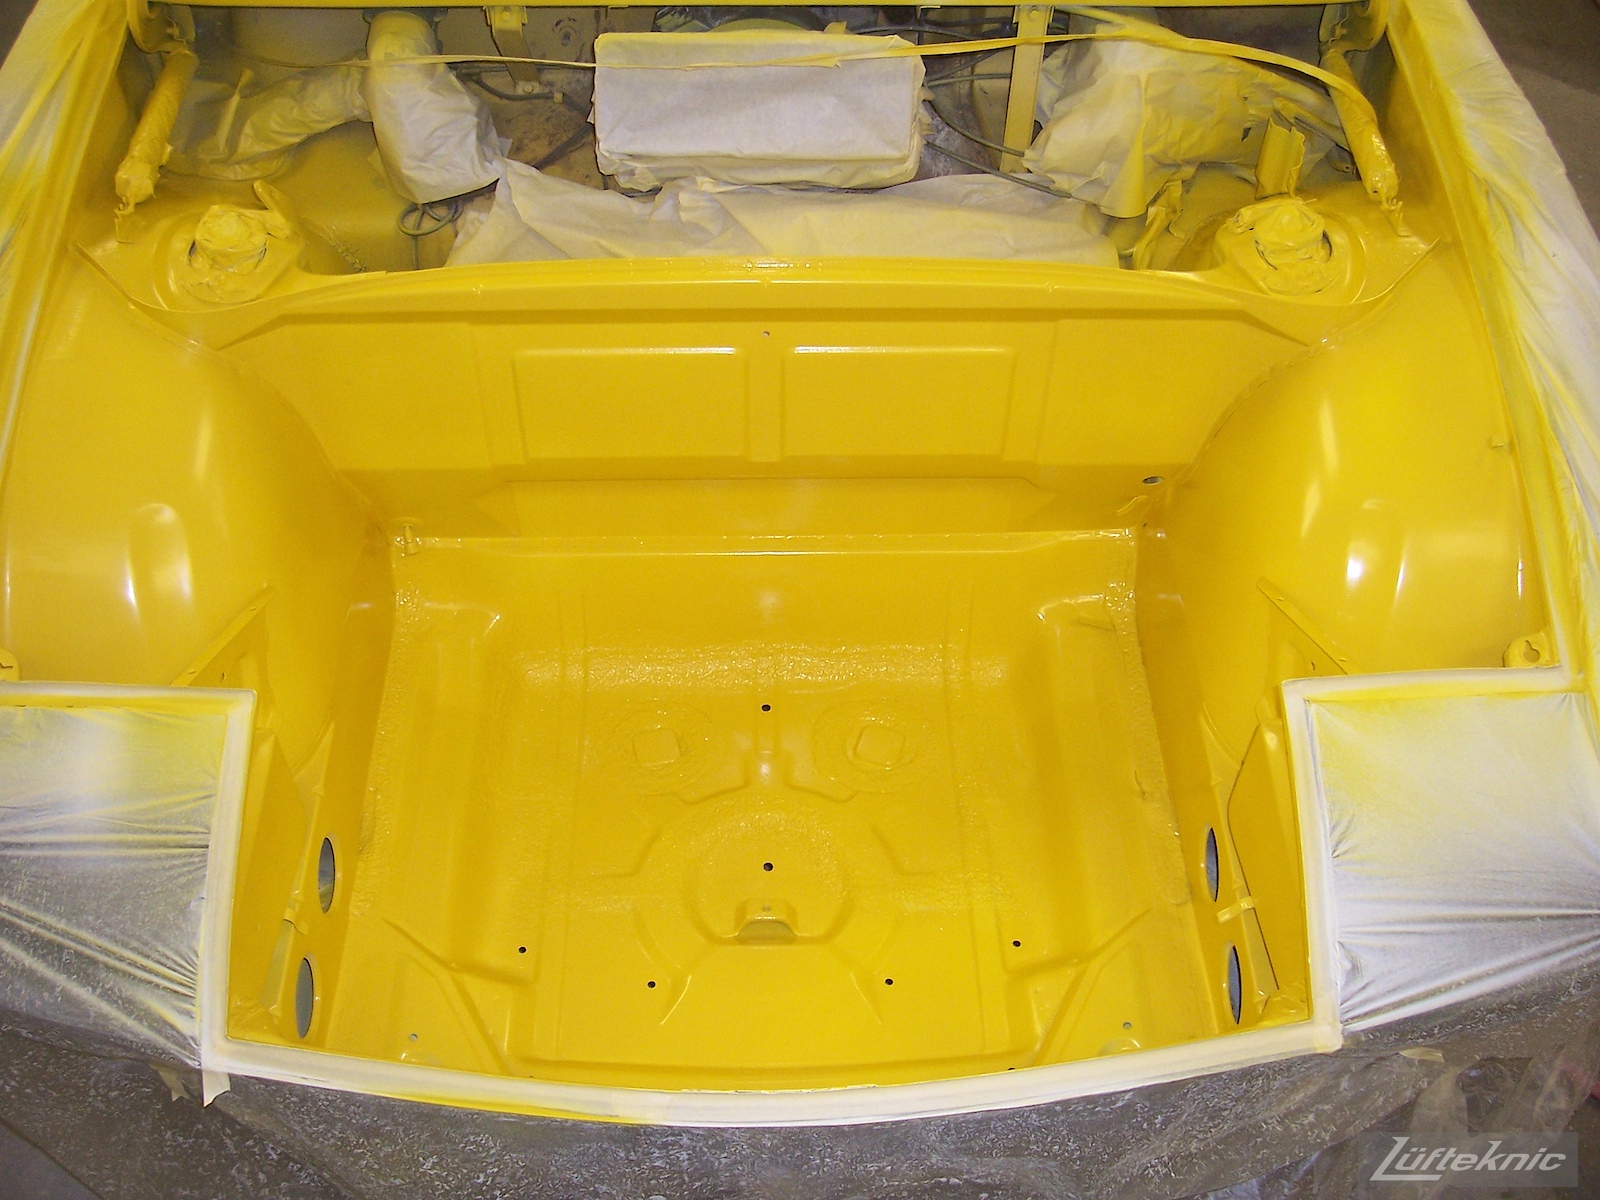 Fresh yellow paint in the front trunk of a Porsche 914 being restored.